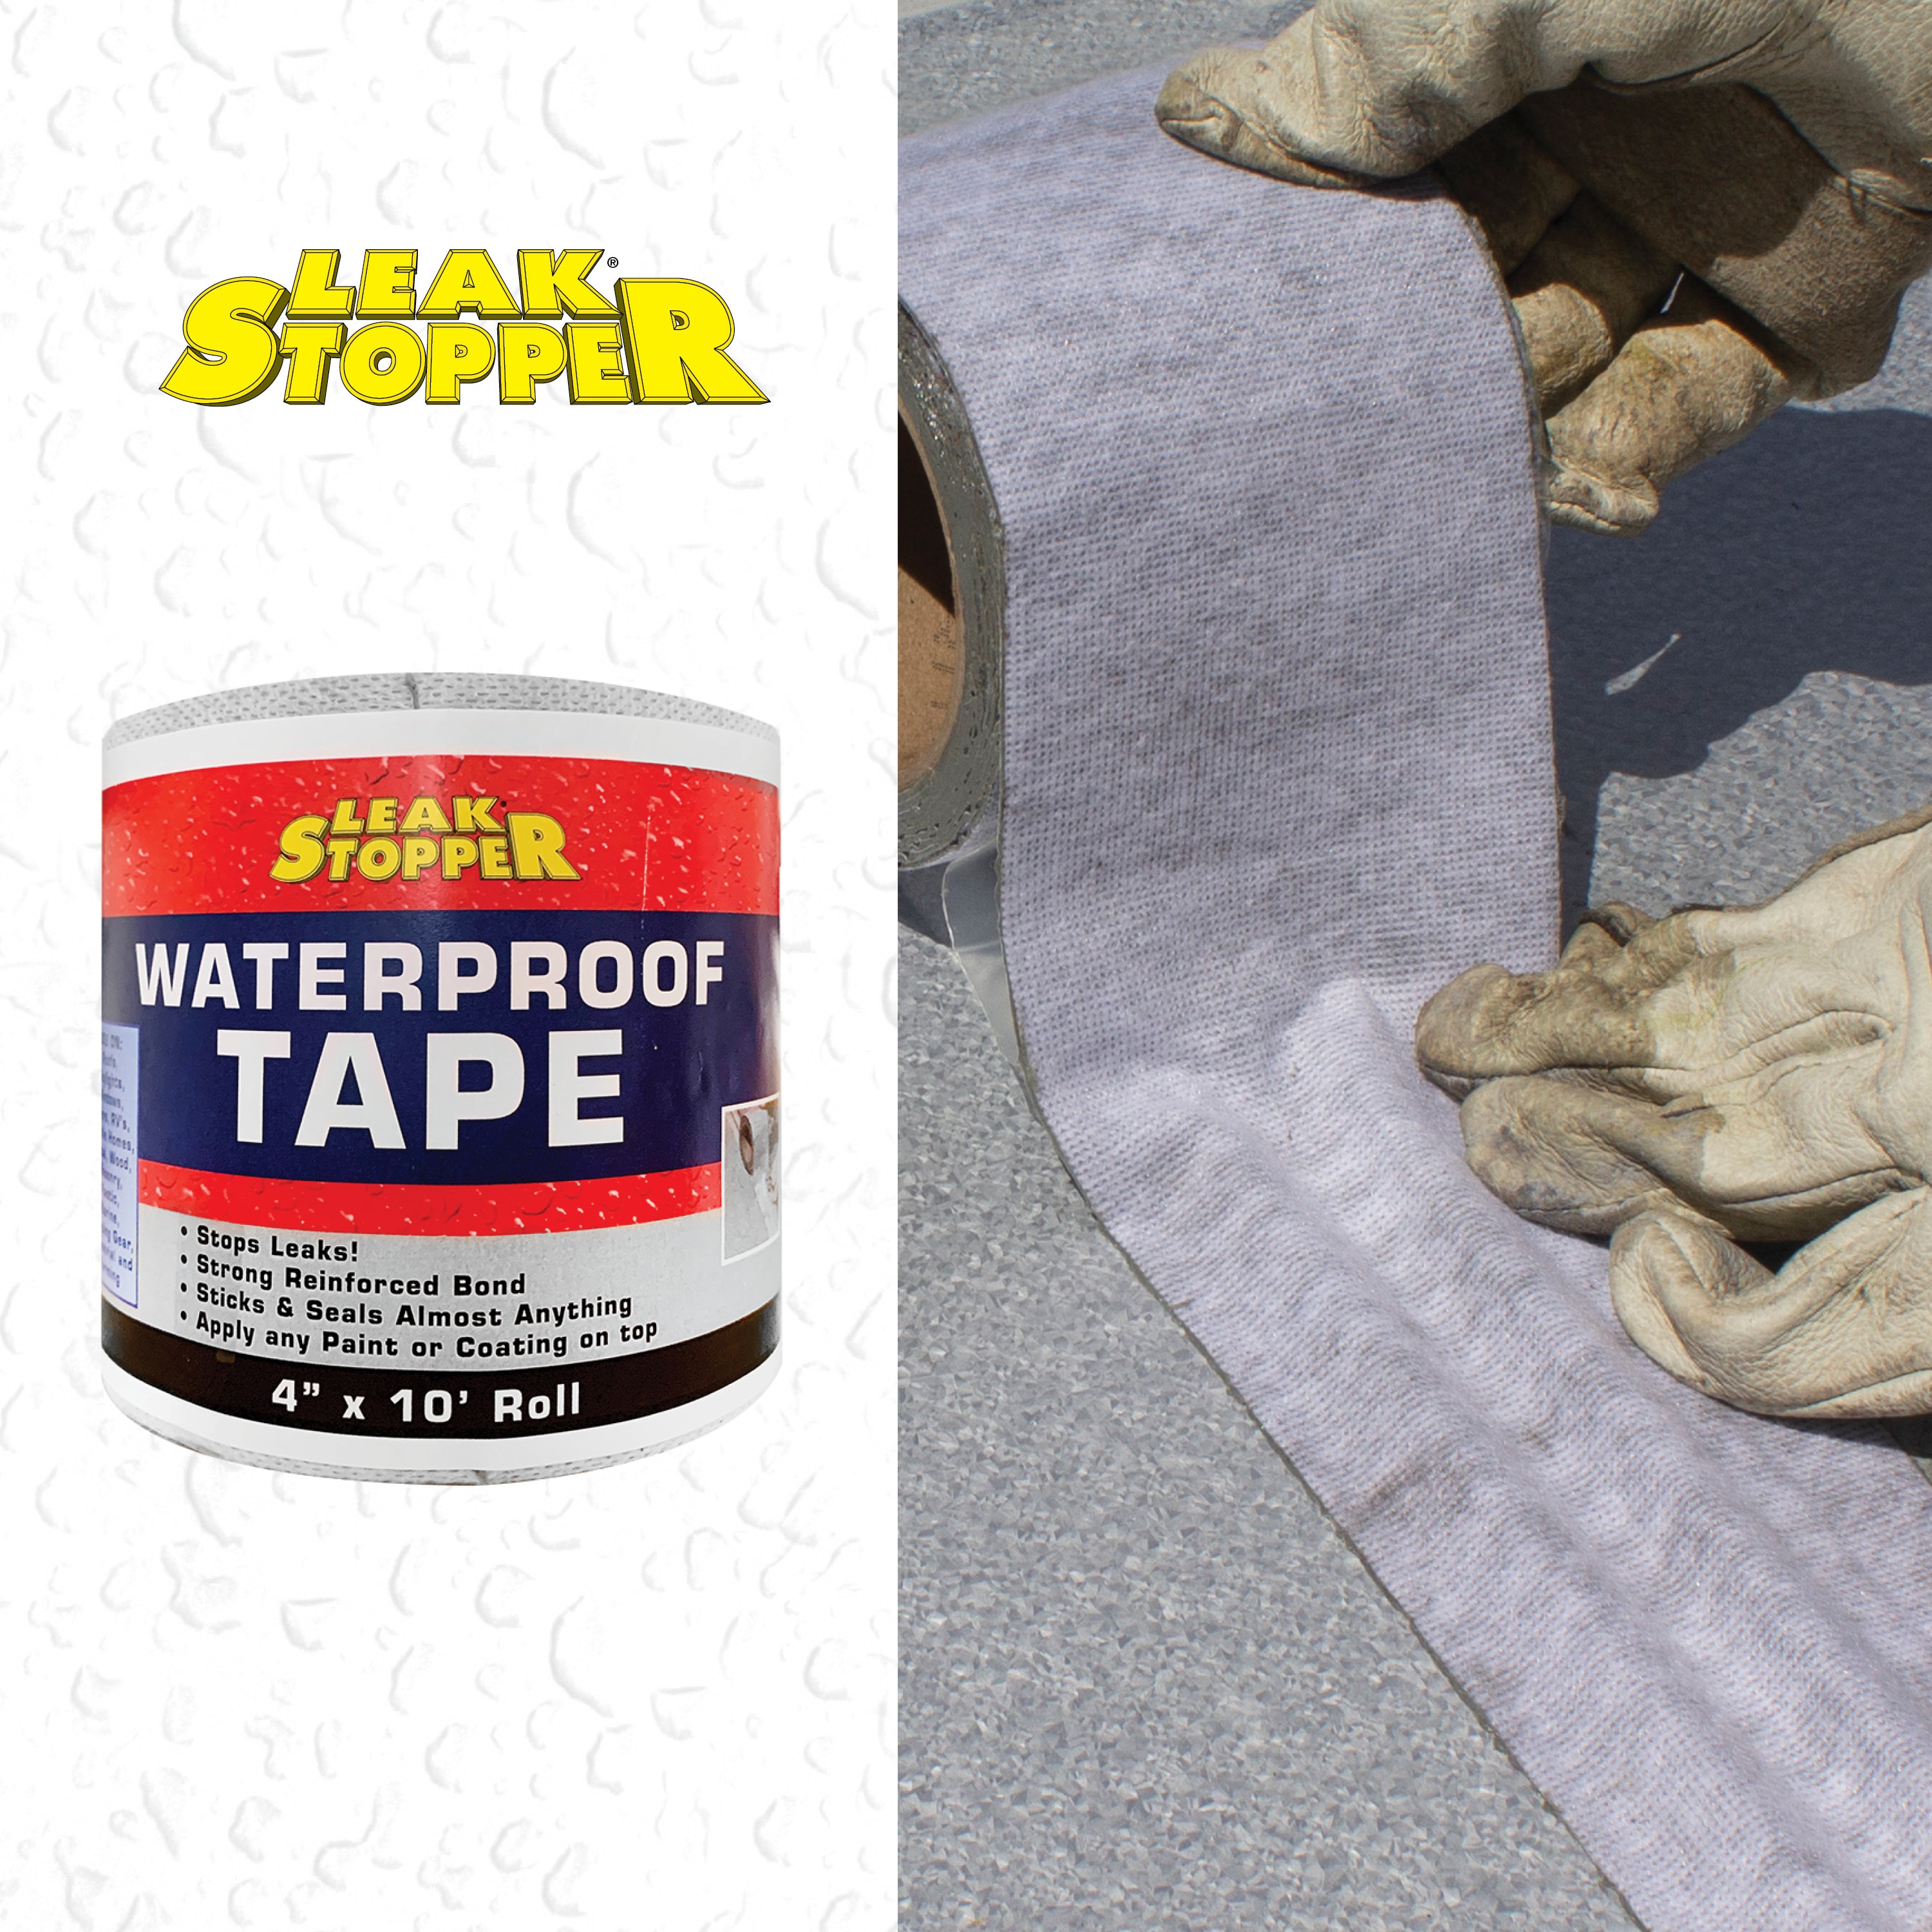 LEAK STOPPER Rubber Flexx 15-oz Waterproof Roof Sealant in the Roof  Sealants department at